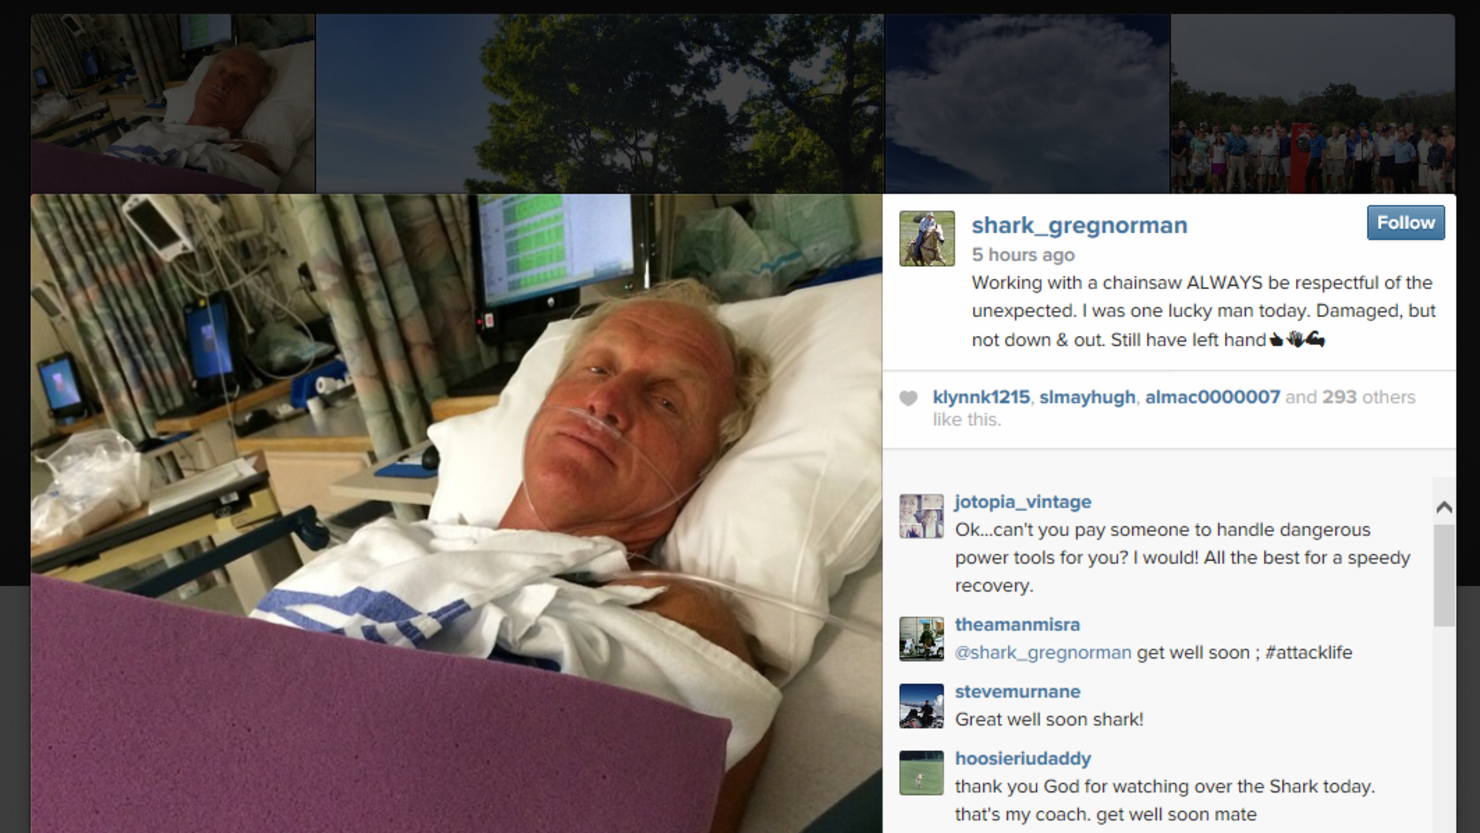 Greg Norman posted photos on Instagram showing himself in the hospital after his chainsaw accident.